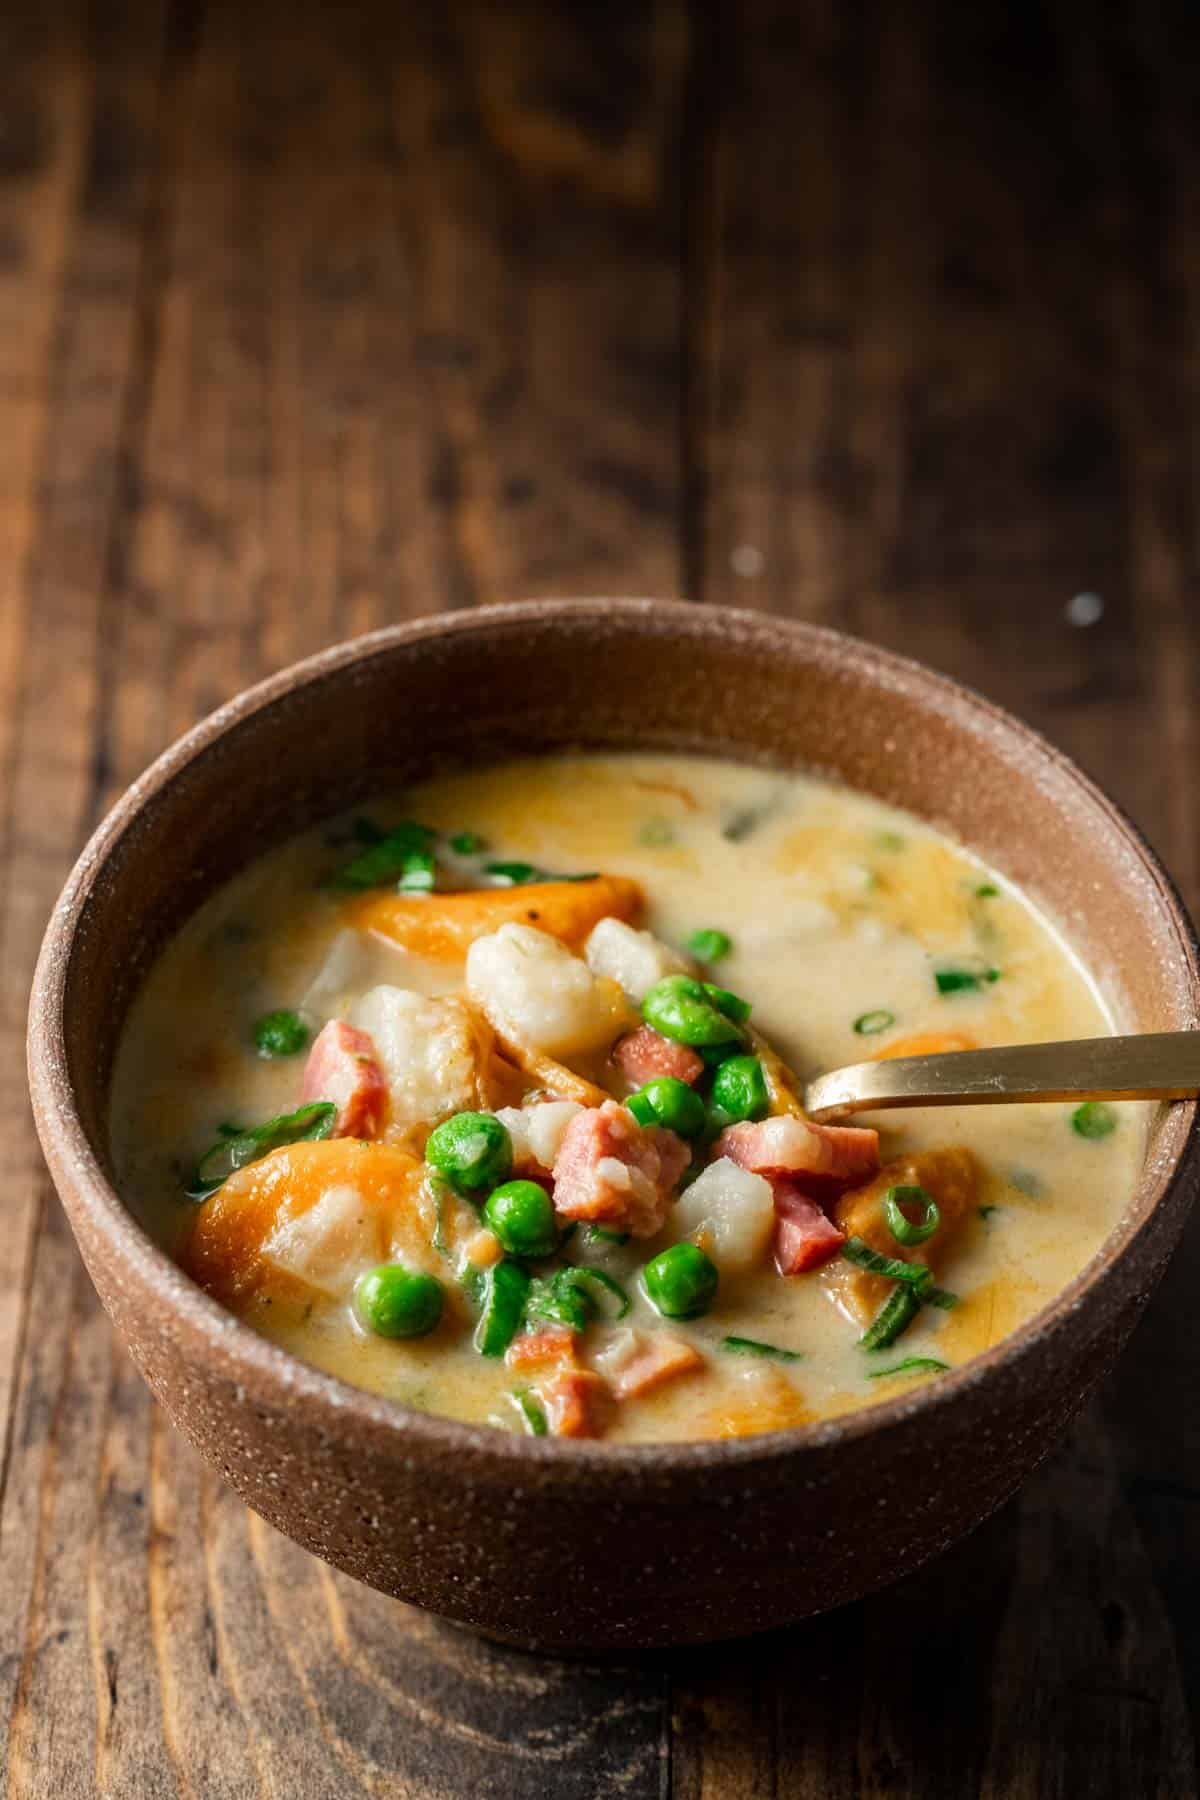 Ham and potato soup in a brown bowl with a spoon and resting on a brown wooden surface.